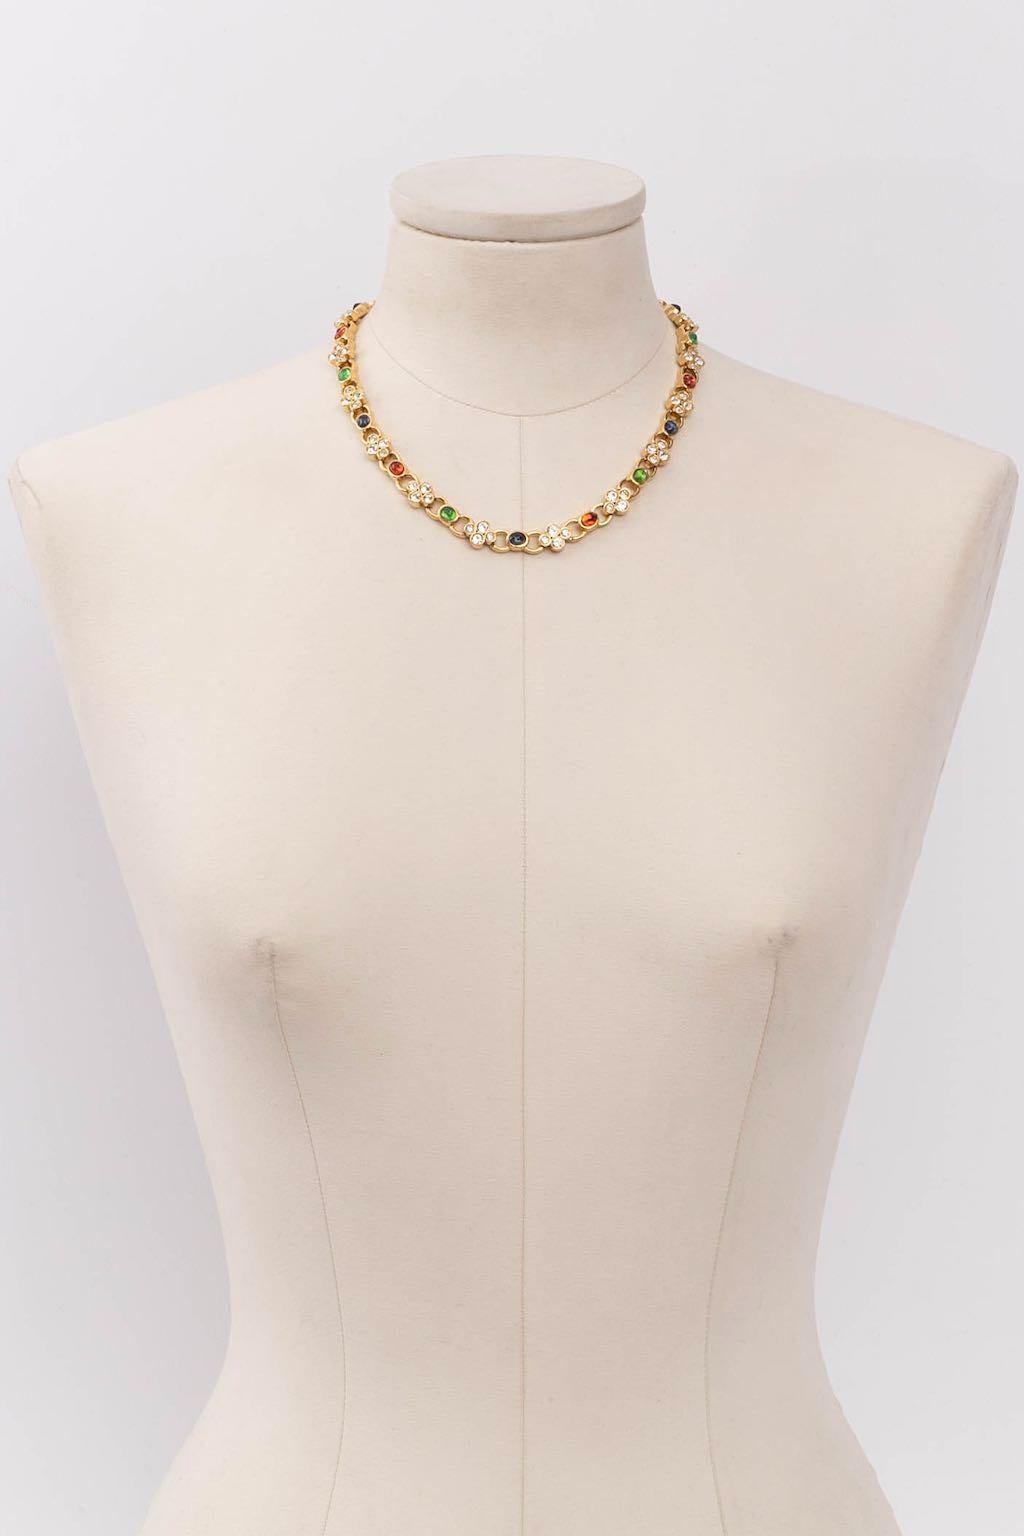 Carven - Choker in gilded metal, glass paste and rhinestones.

Additional information: 
Dimensions: Length: 43.5 cm (17.12